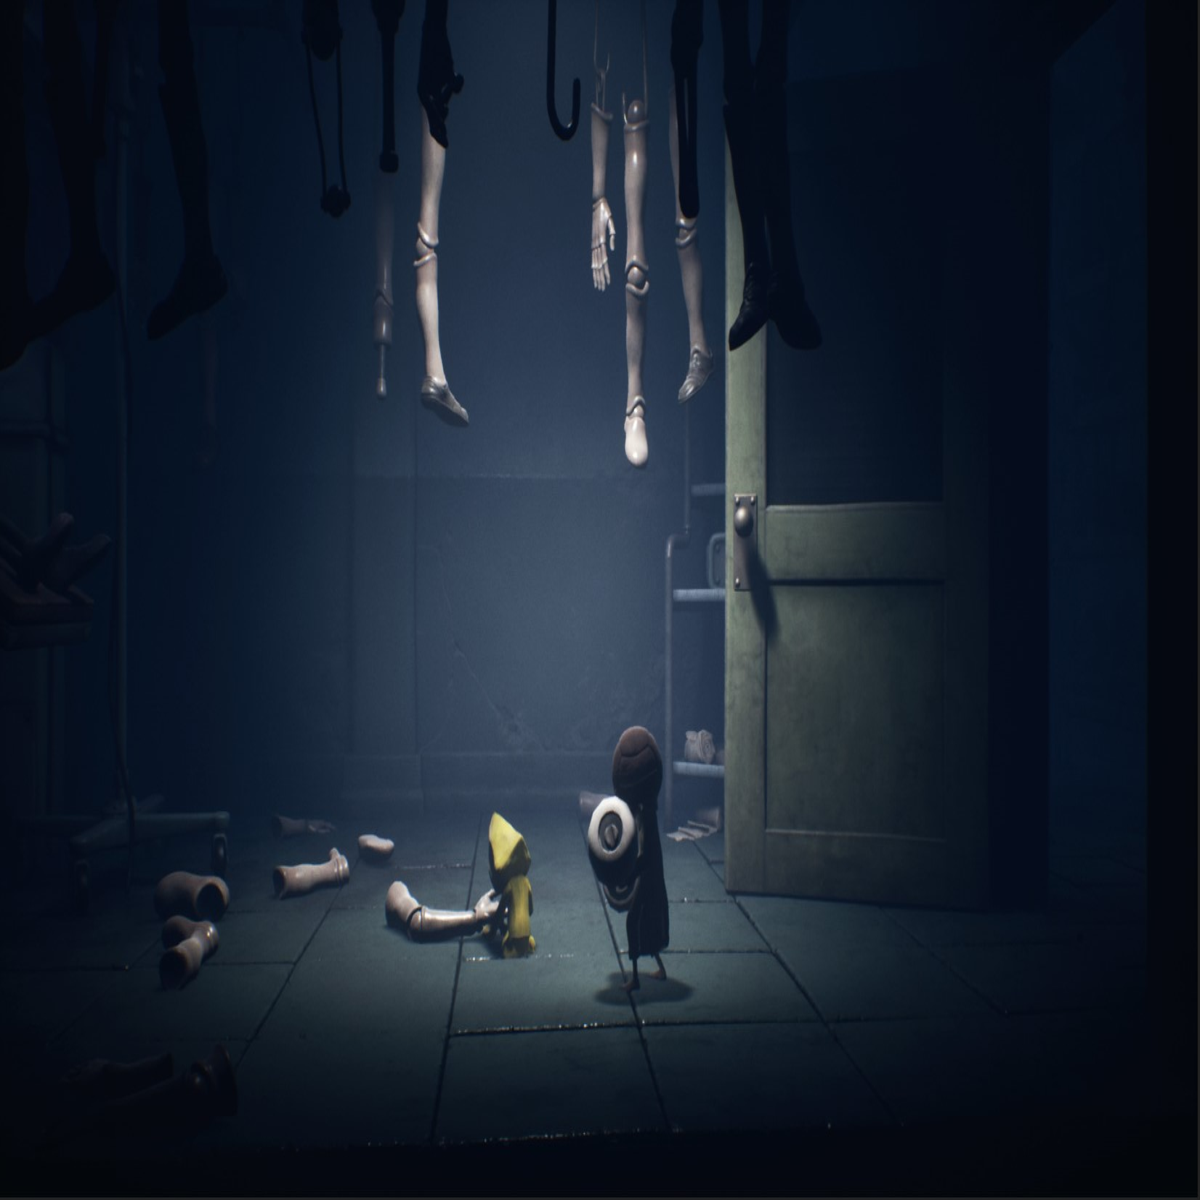 Games like Little Nightmares on Switch & mobile